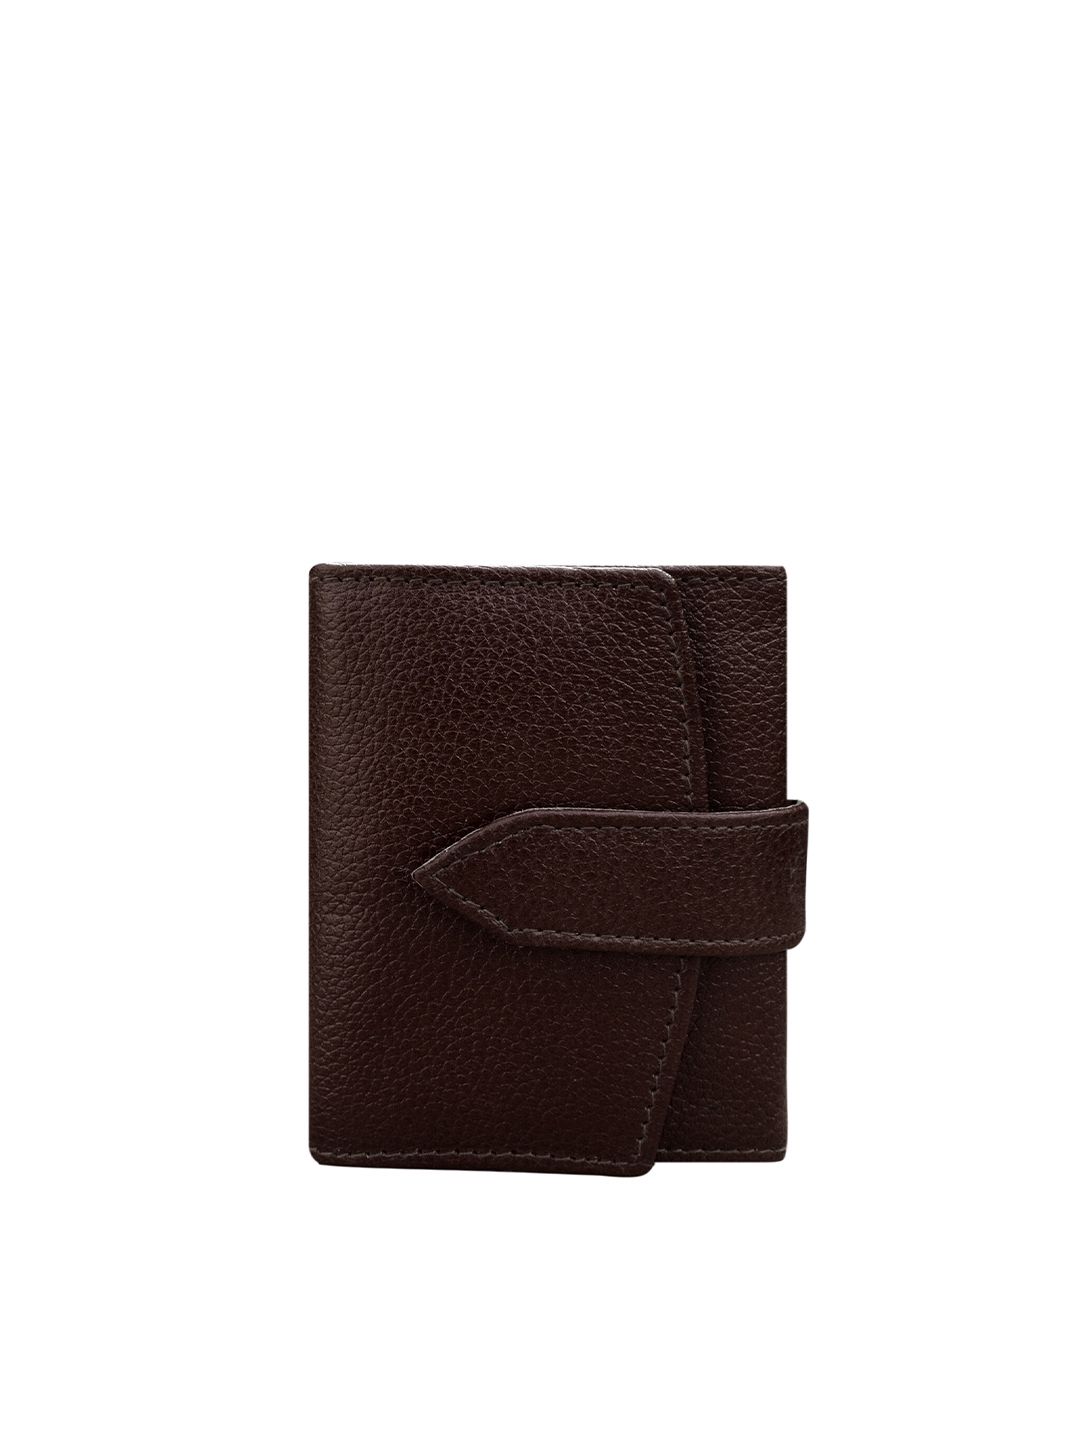 ABYS Unisex Coffee Brown Textured Leather Wallet Price in India